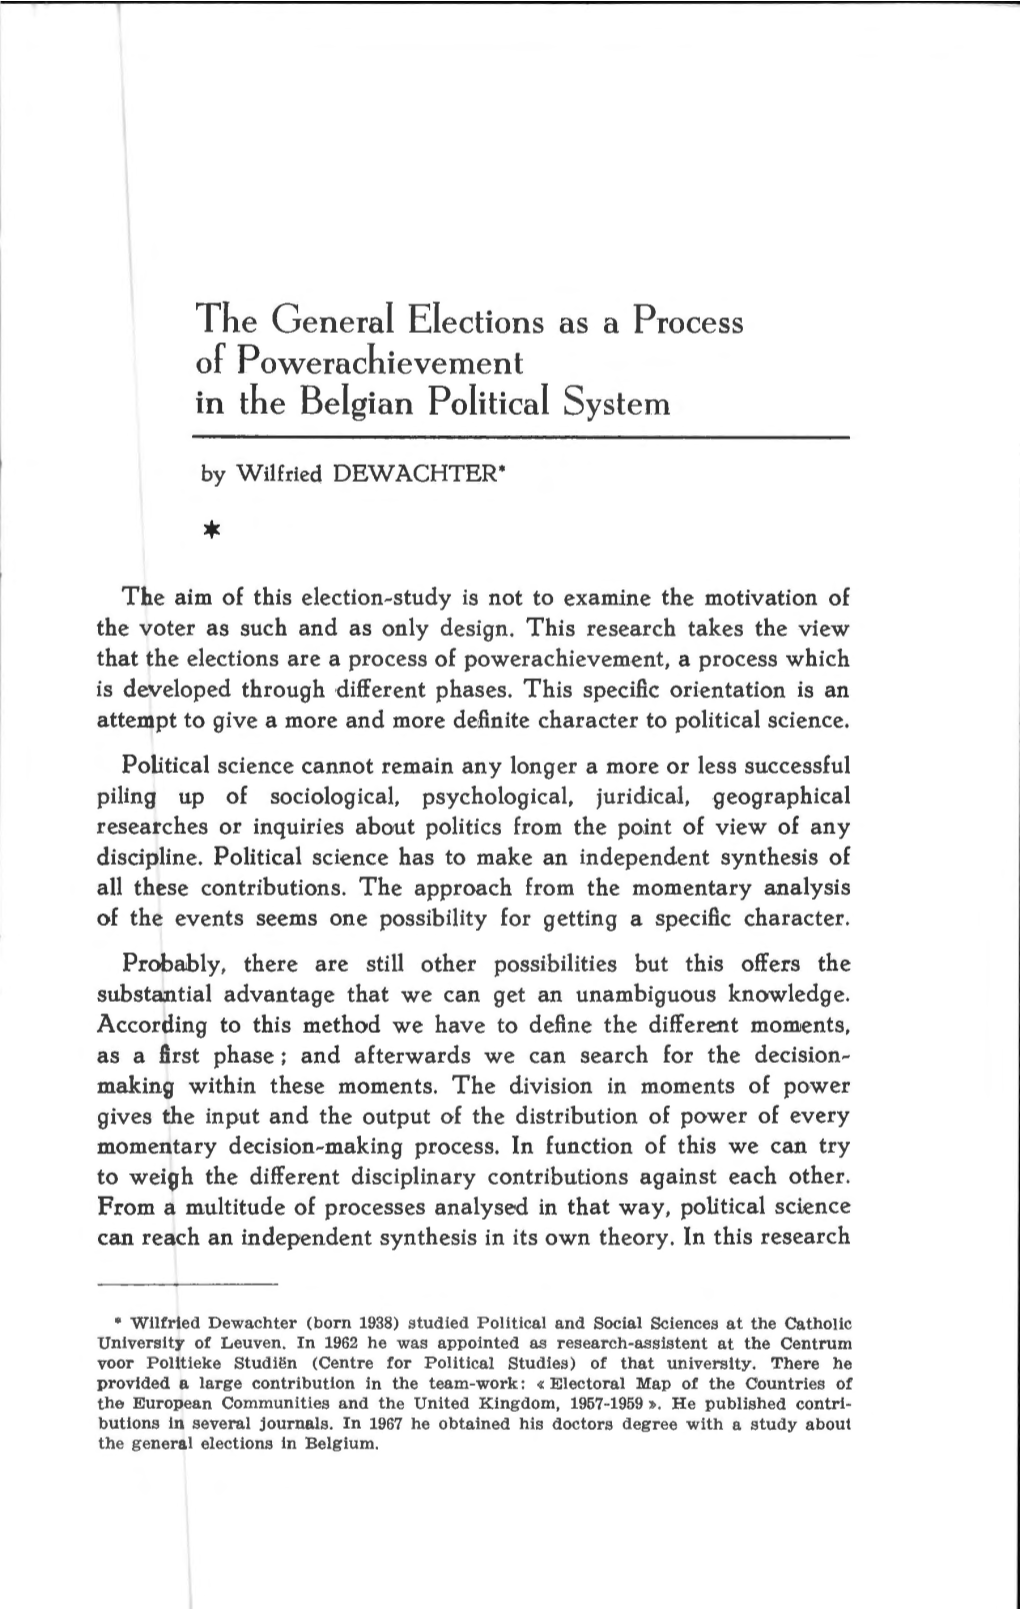 The Genera! Elections As a Process of Powerachievement in the Belgian Politica! System